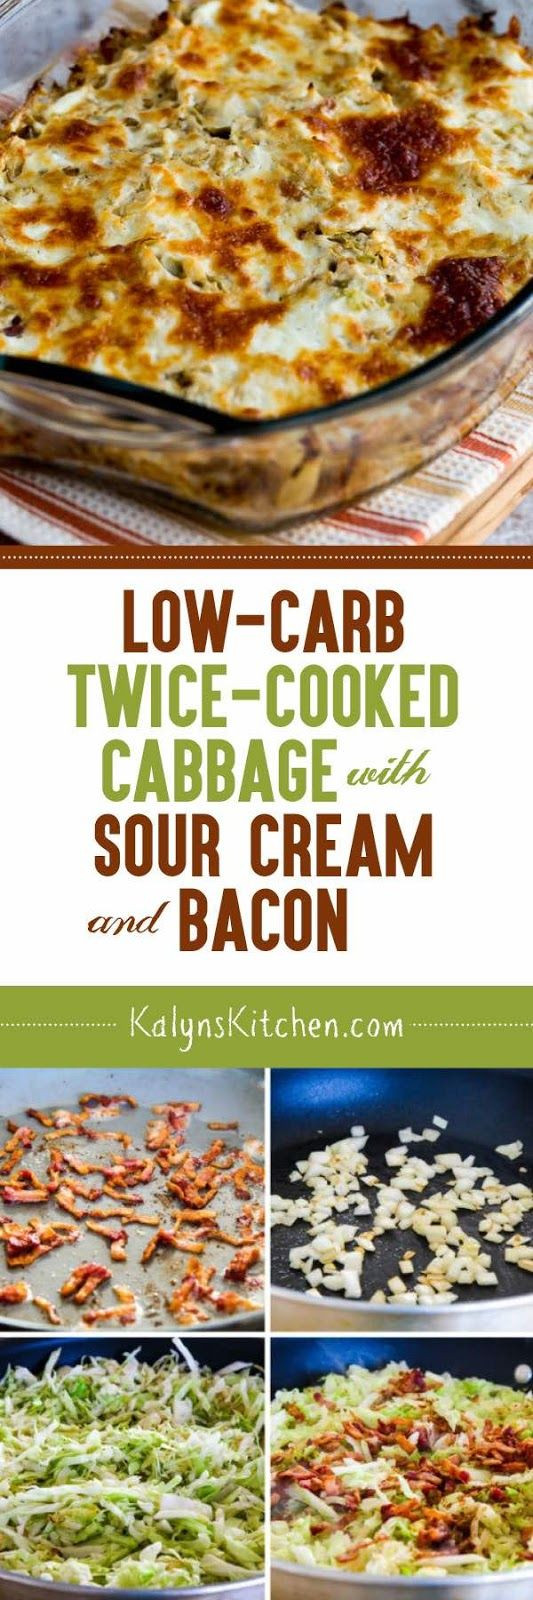 Low Carb Sour Cream Recipes
 Low Carb Twice Cooked Cabbage with Sour Cream and Bacon